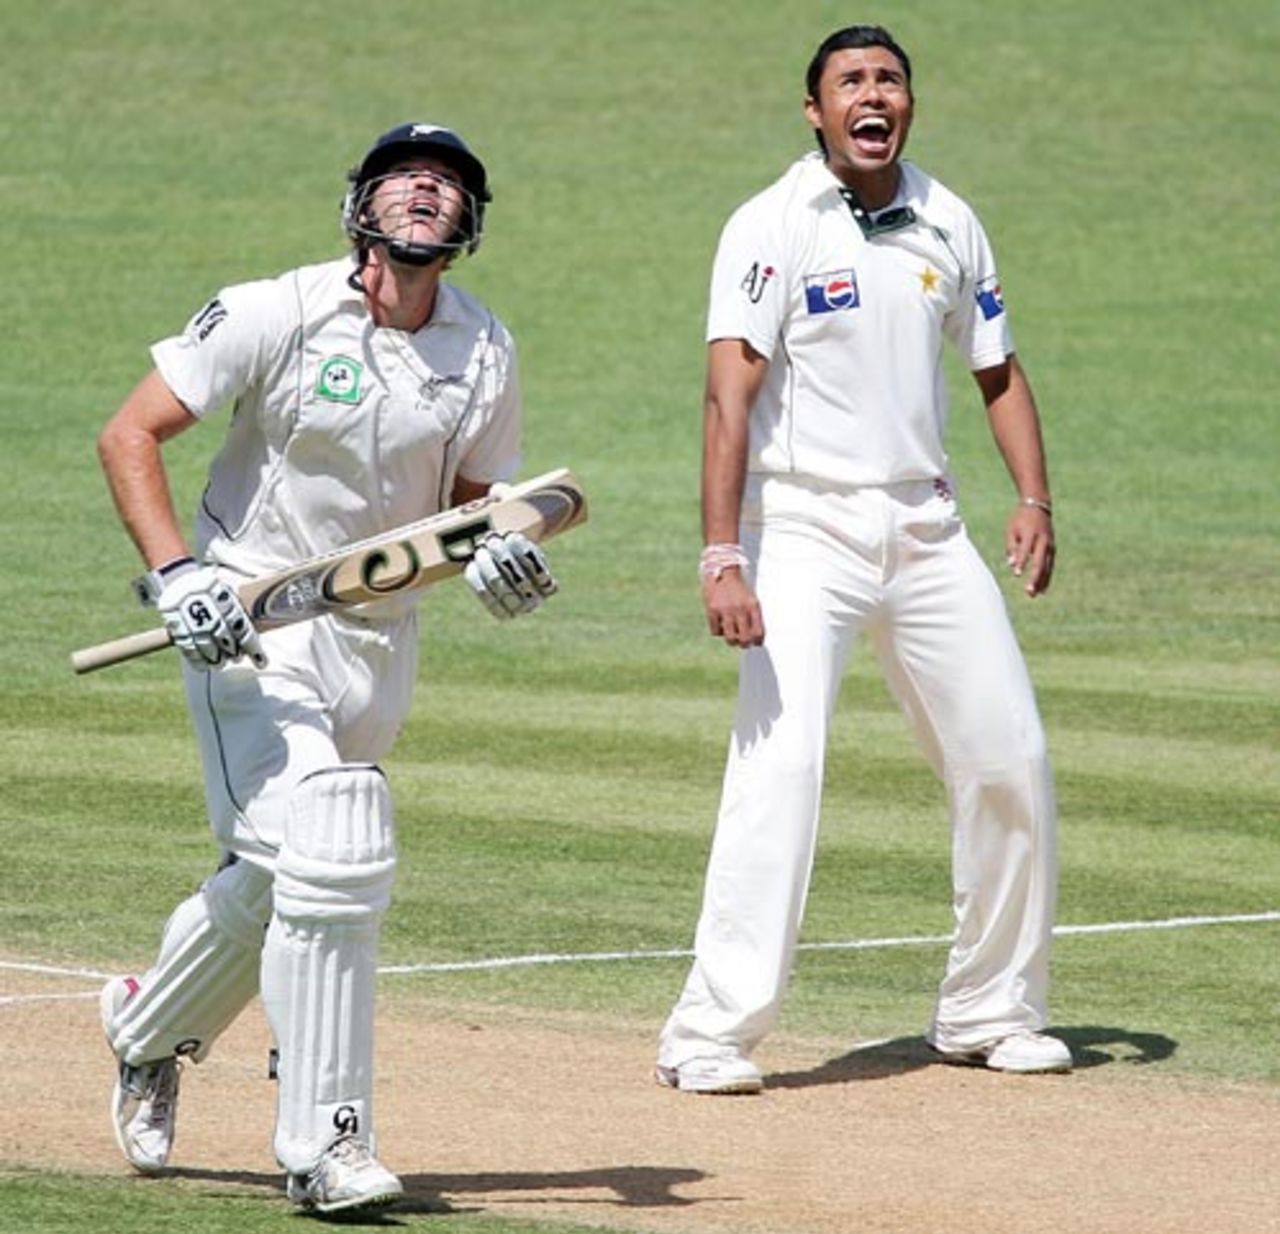 Danish Kaneria calls for Mohammad Yousuf to catch Ross Taylor, New Zealand v Pakistan, 3rd Test, Napier, 2nd day, December 12, 2009